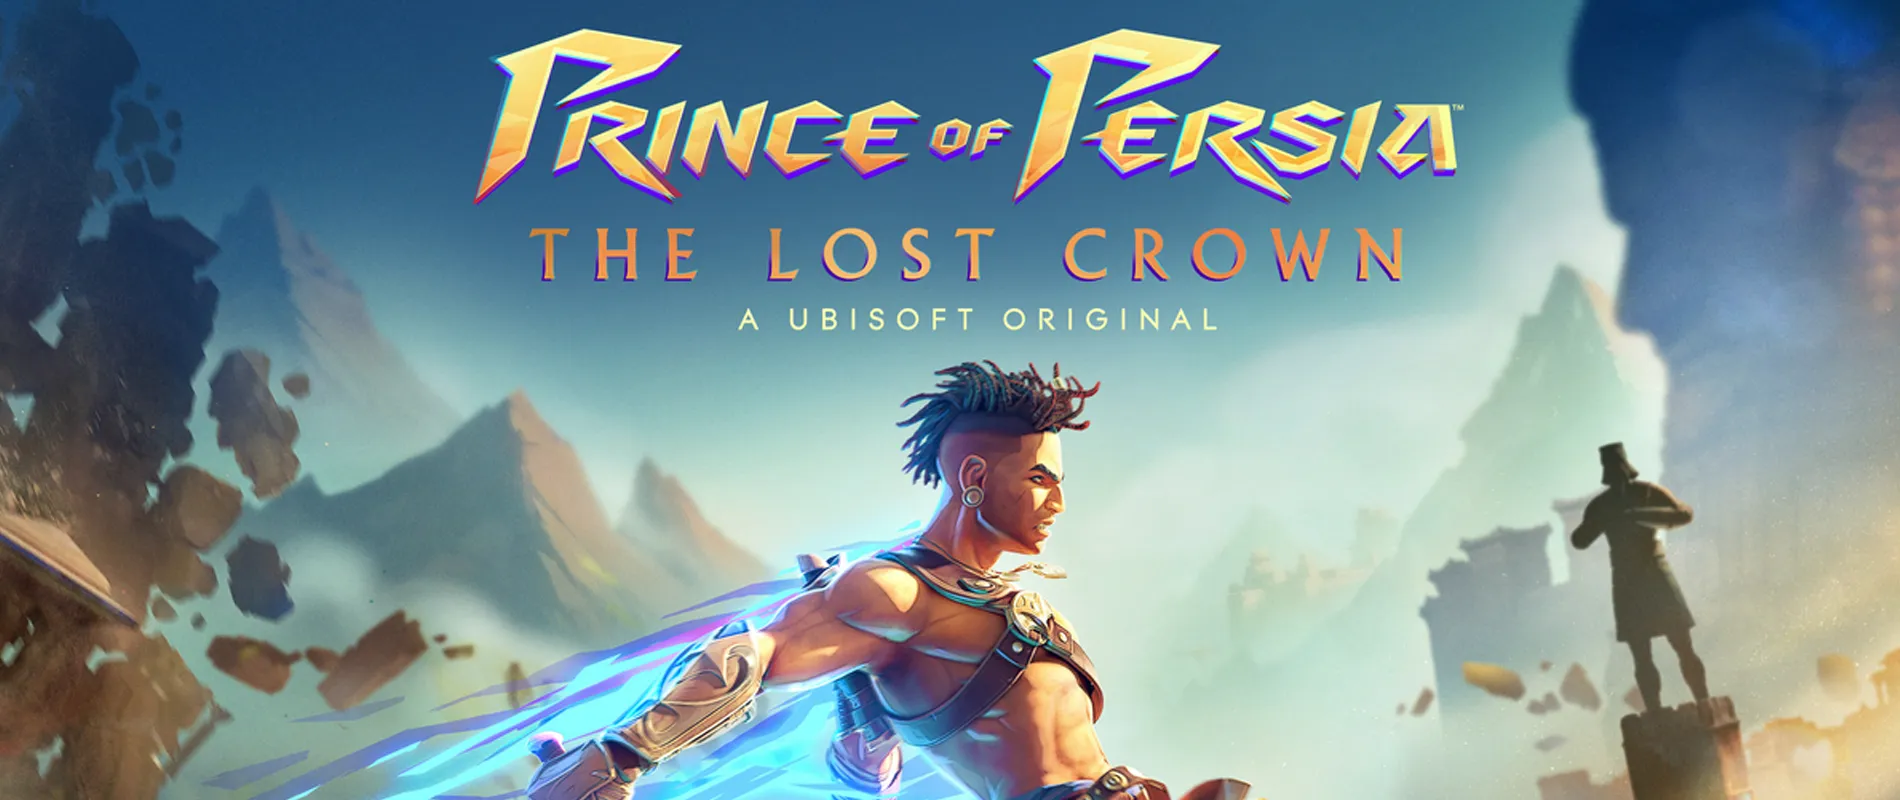 Prince of Persia: The Lost Crown demo, story trailer